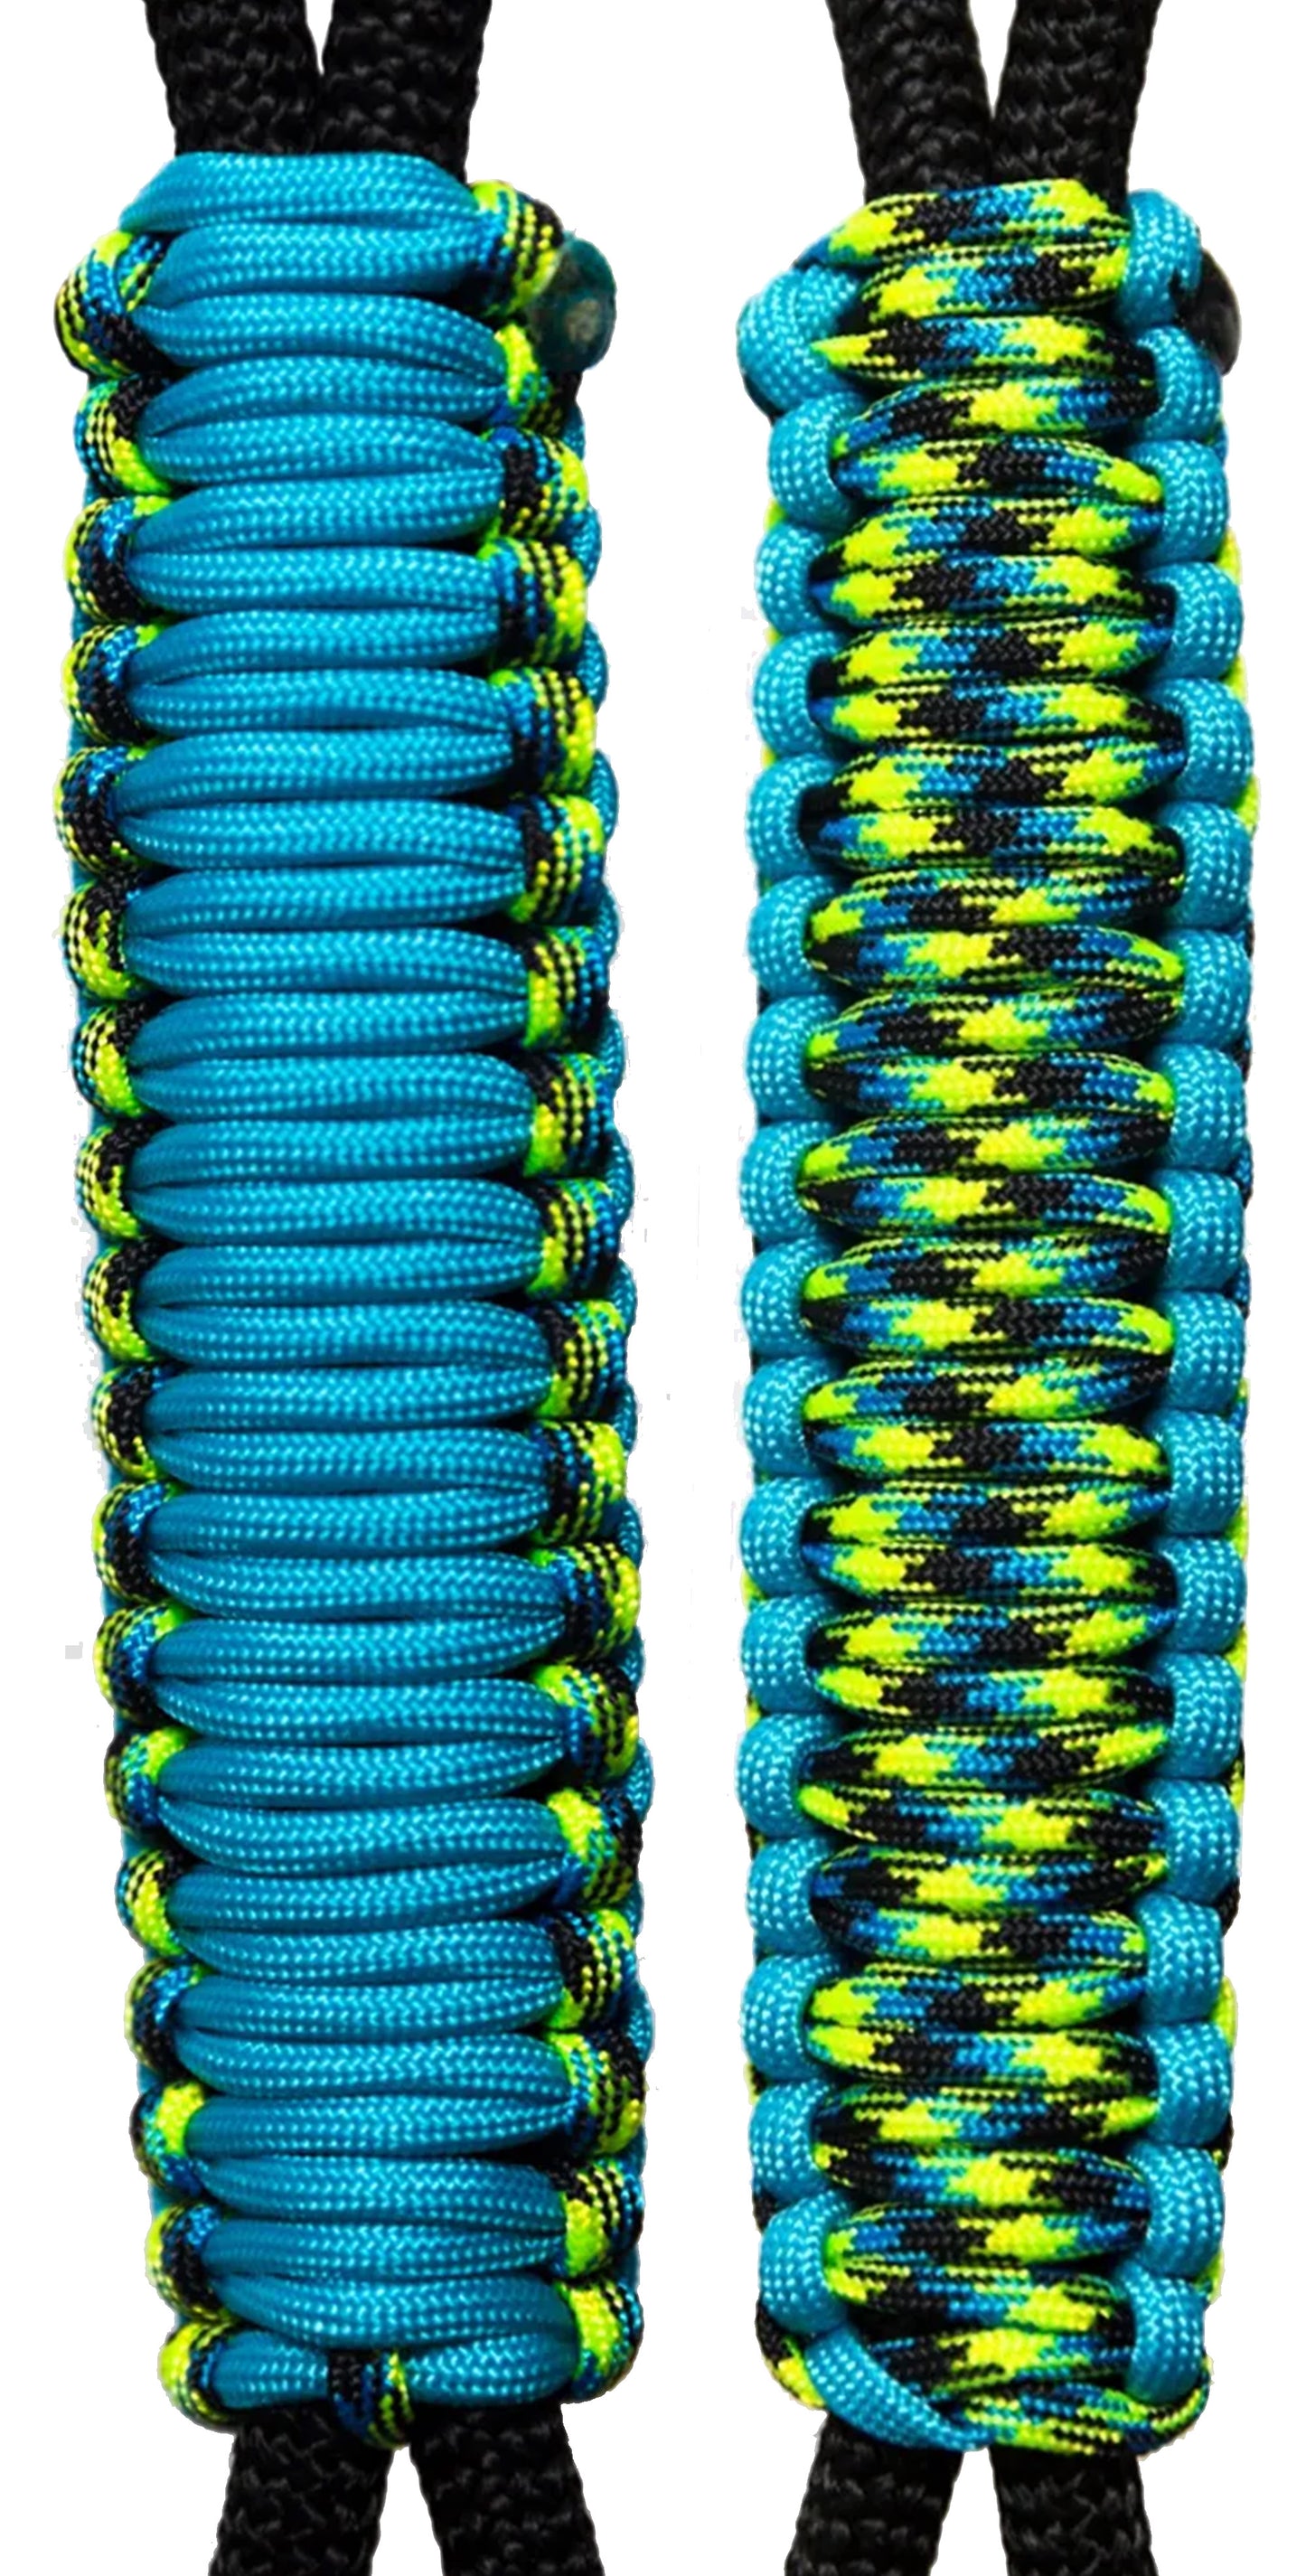 Blue Turquoise & Aquatica C016C062 - Paracord Handmade Handles for Stainless Steel Tumblers - Made in USA!